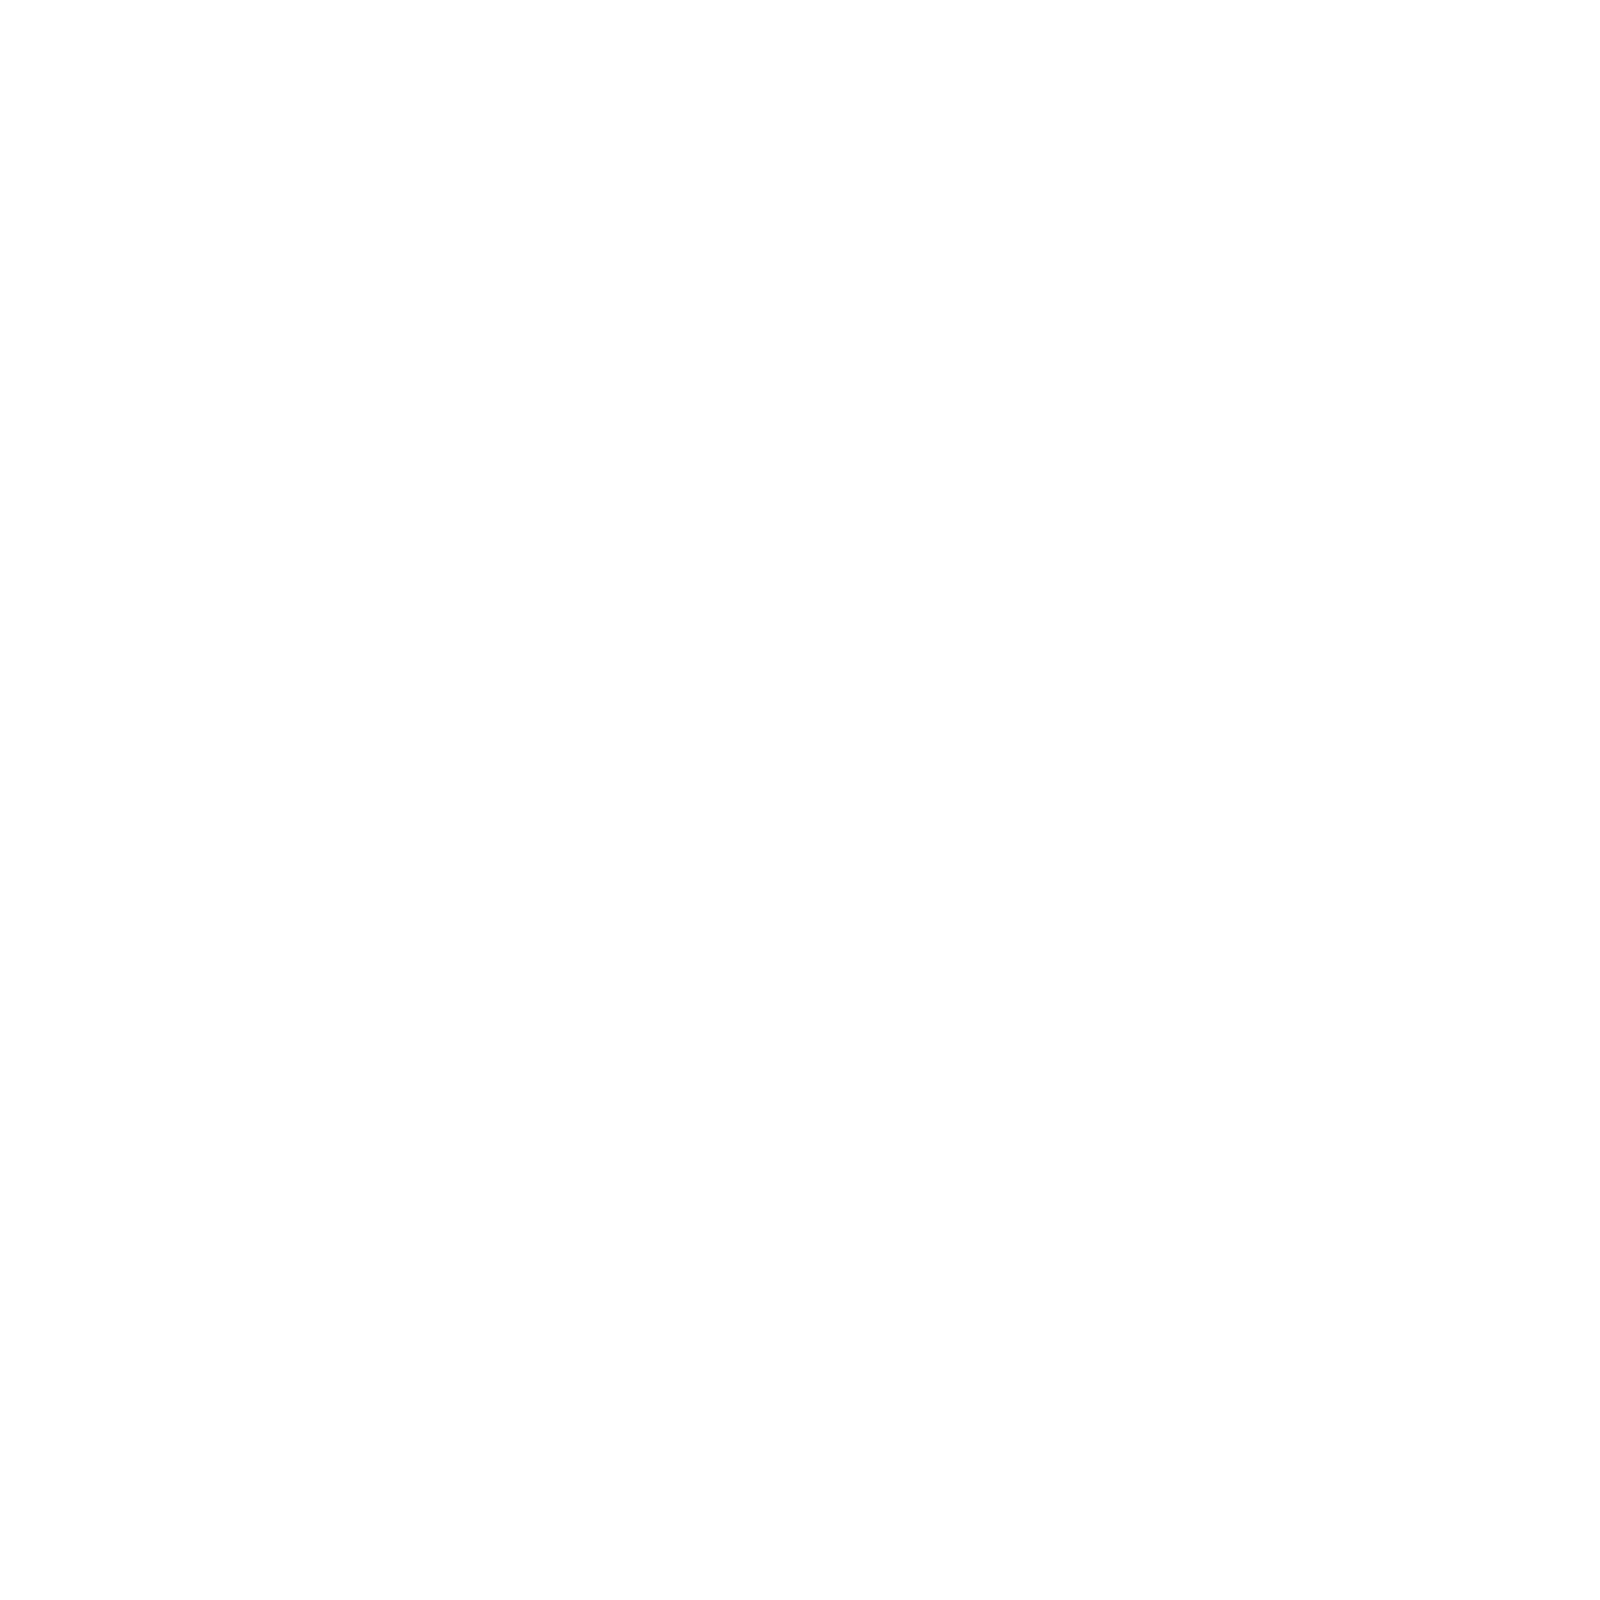 Carter Perry Bailey branding by Peek Creative Limited